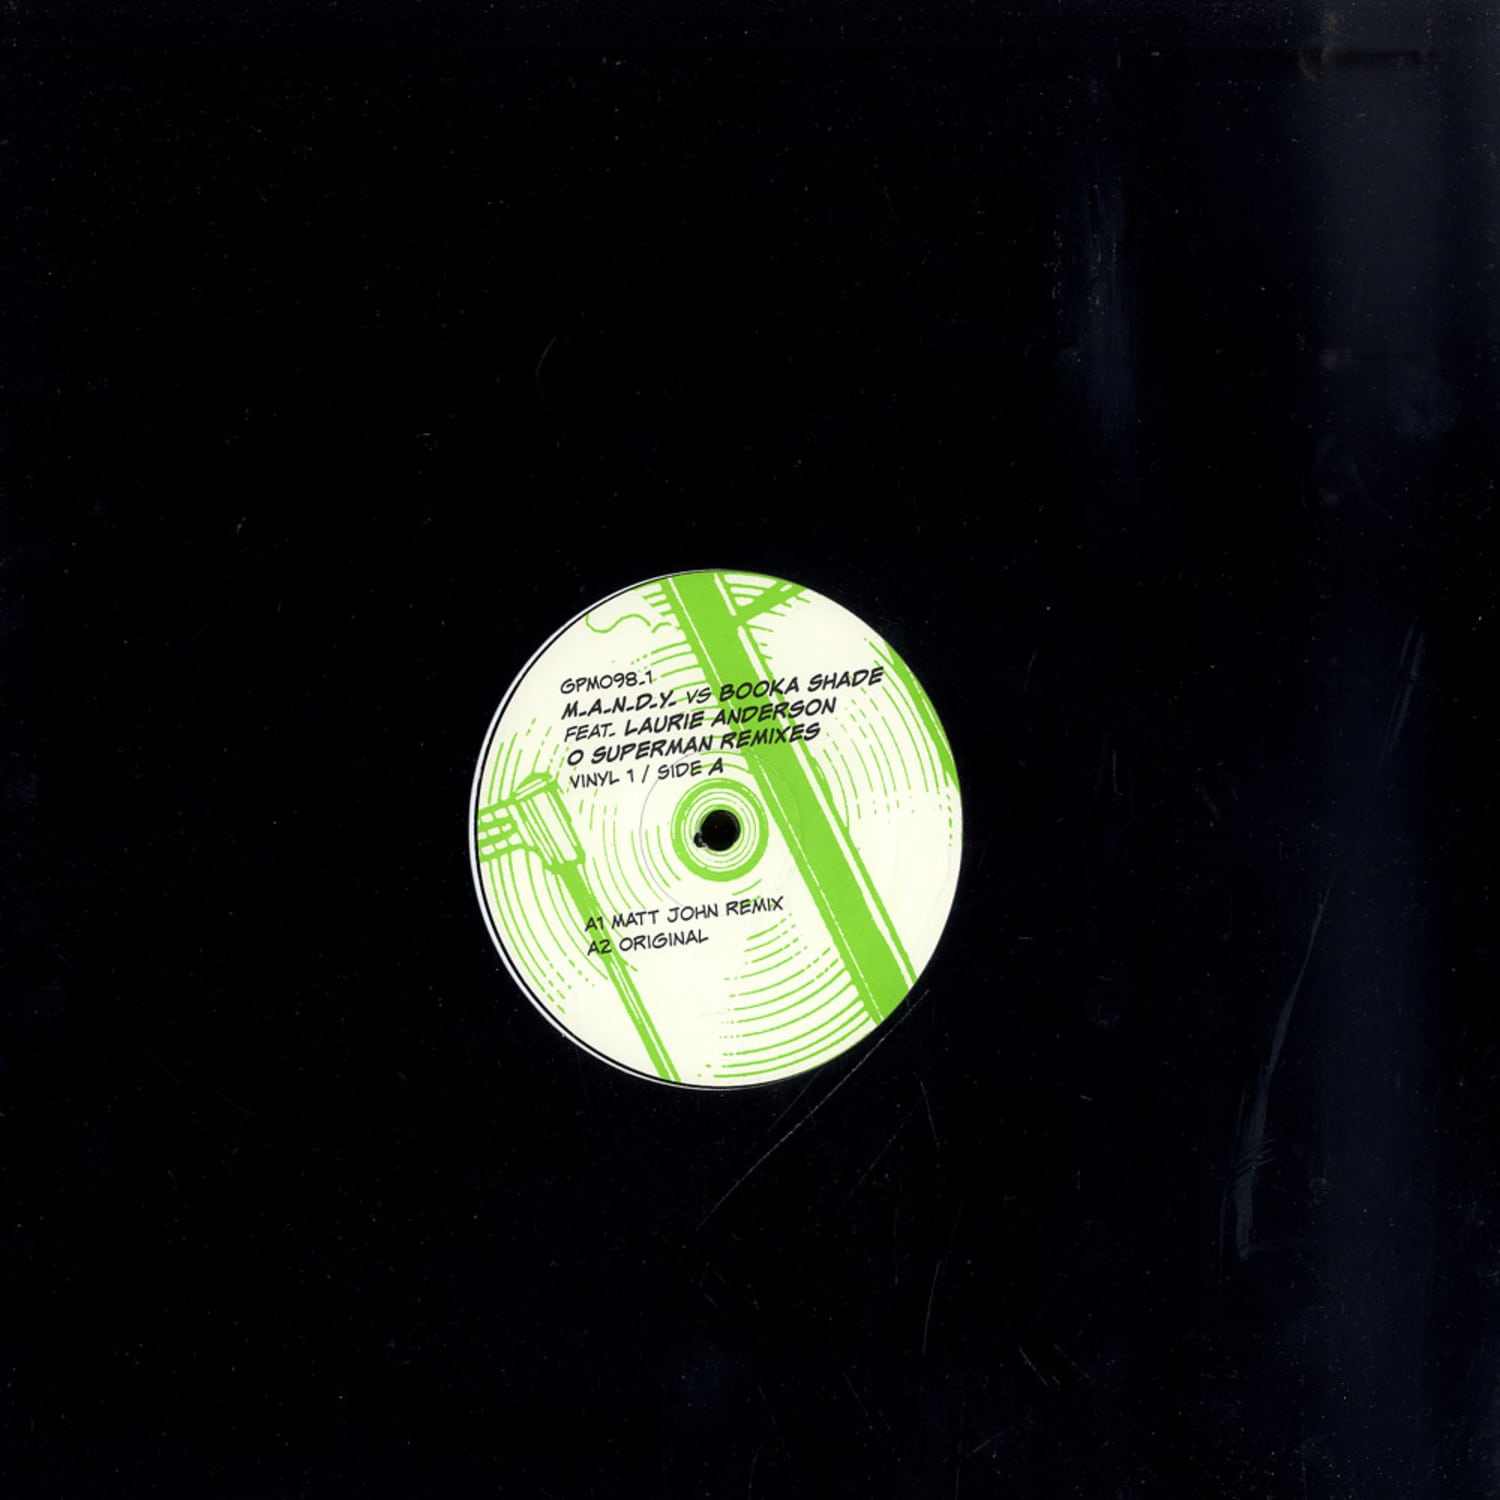 M.A.N.D.Y. vs Booka Shade feat Laurie - OH SUPERMAN REMIXES - VINYL 1 